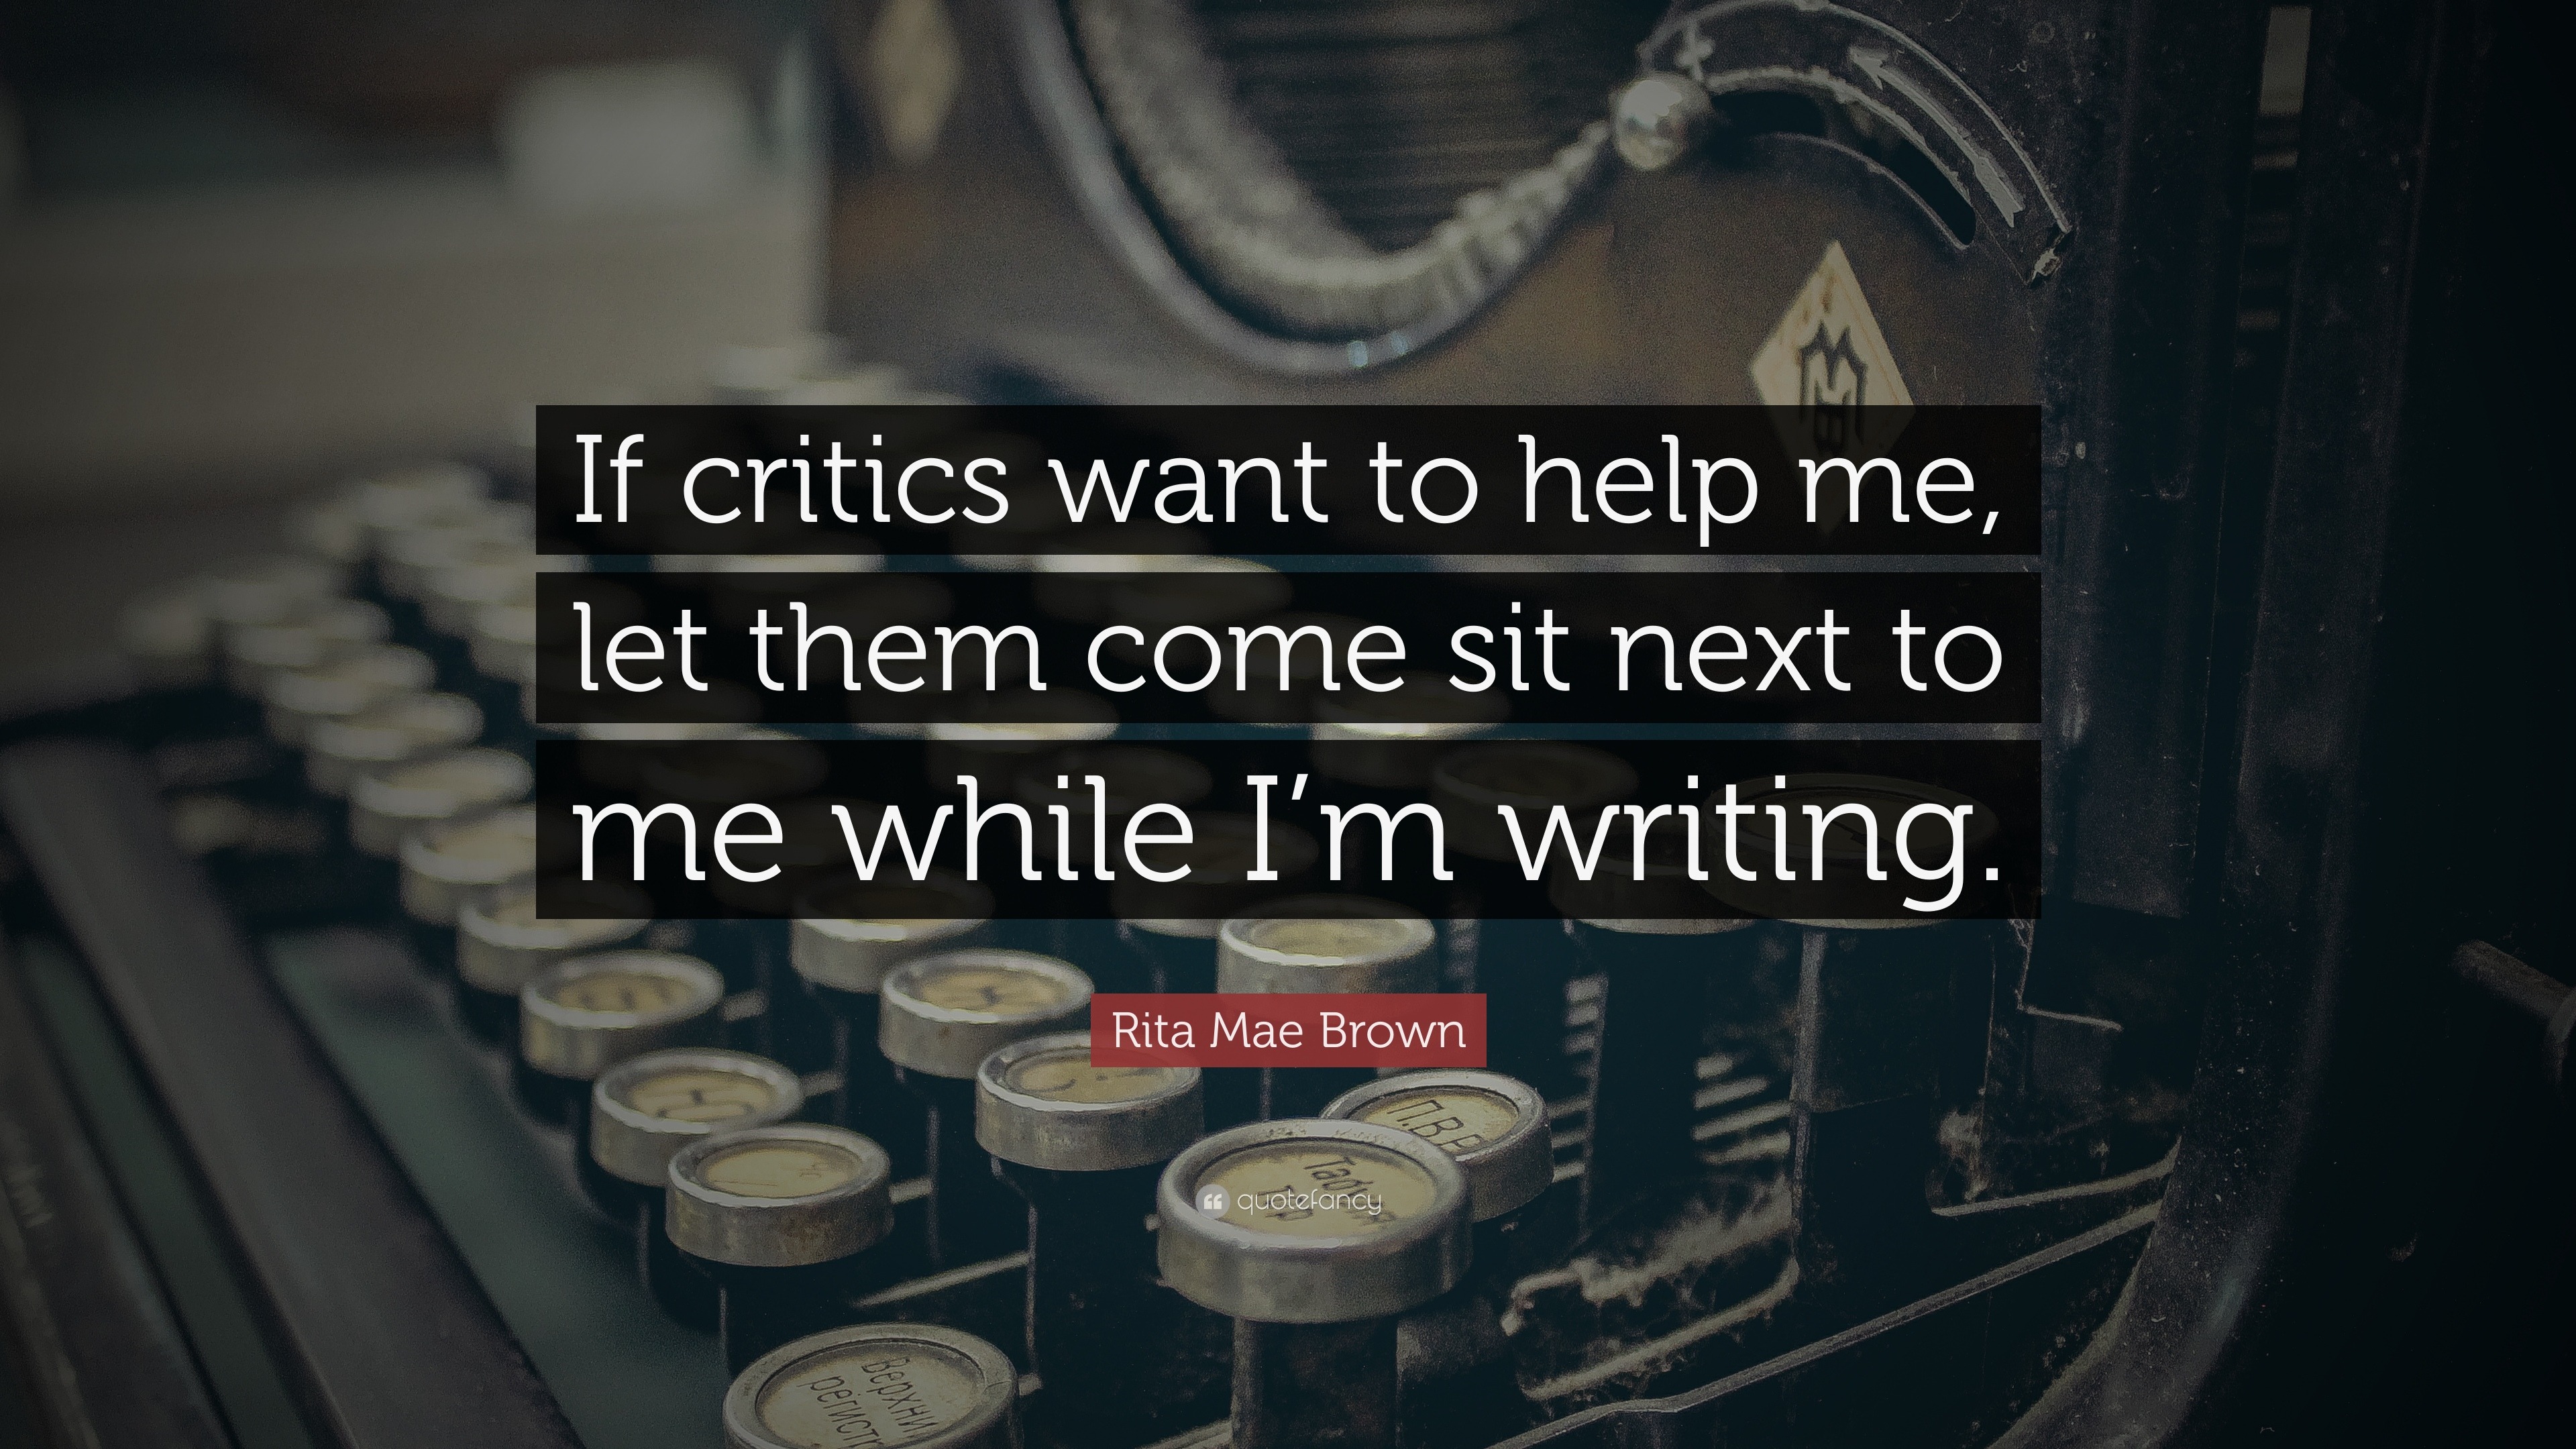 Rita Mae Brown Quote: "If critics want to help me, let them come sit next to me while I'm ...